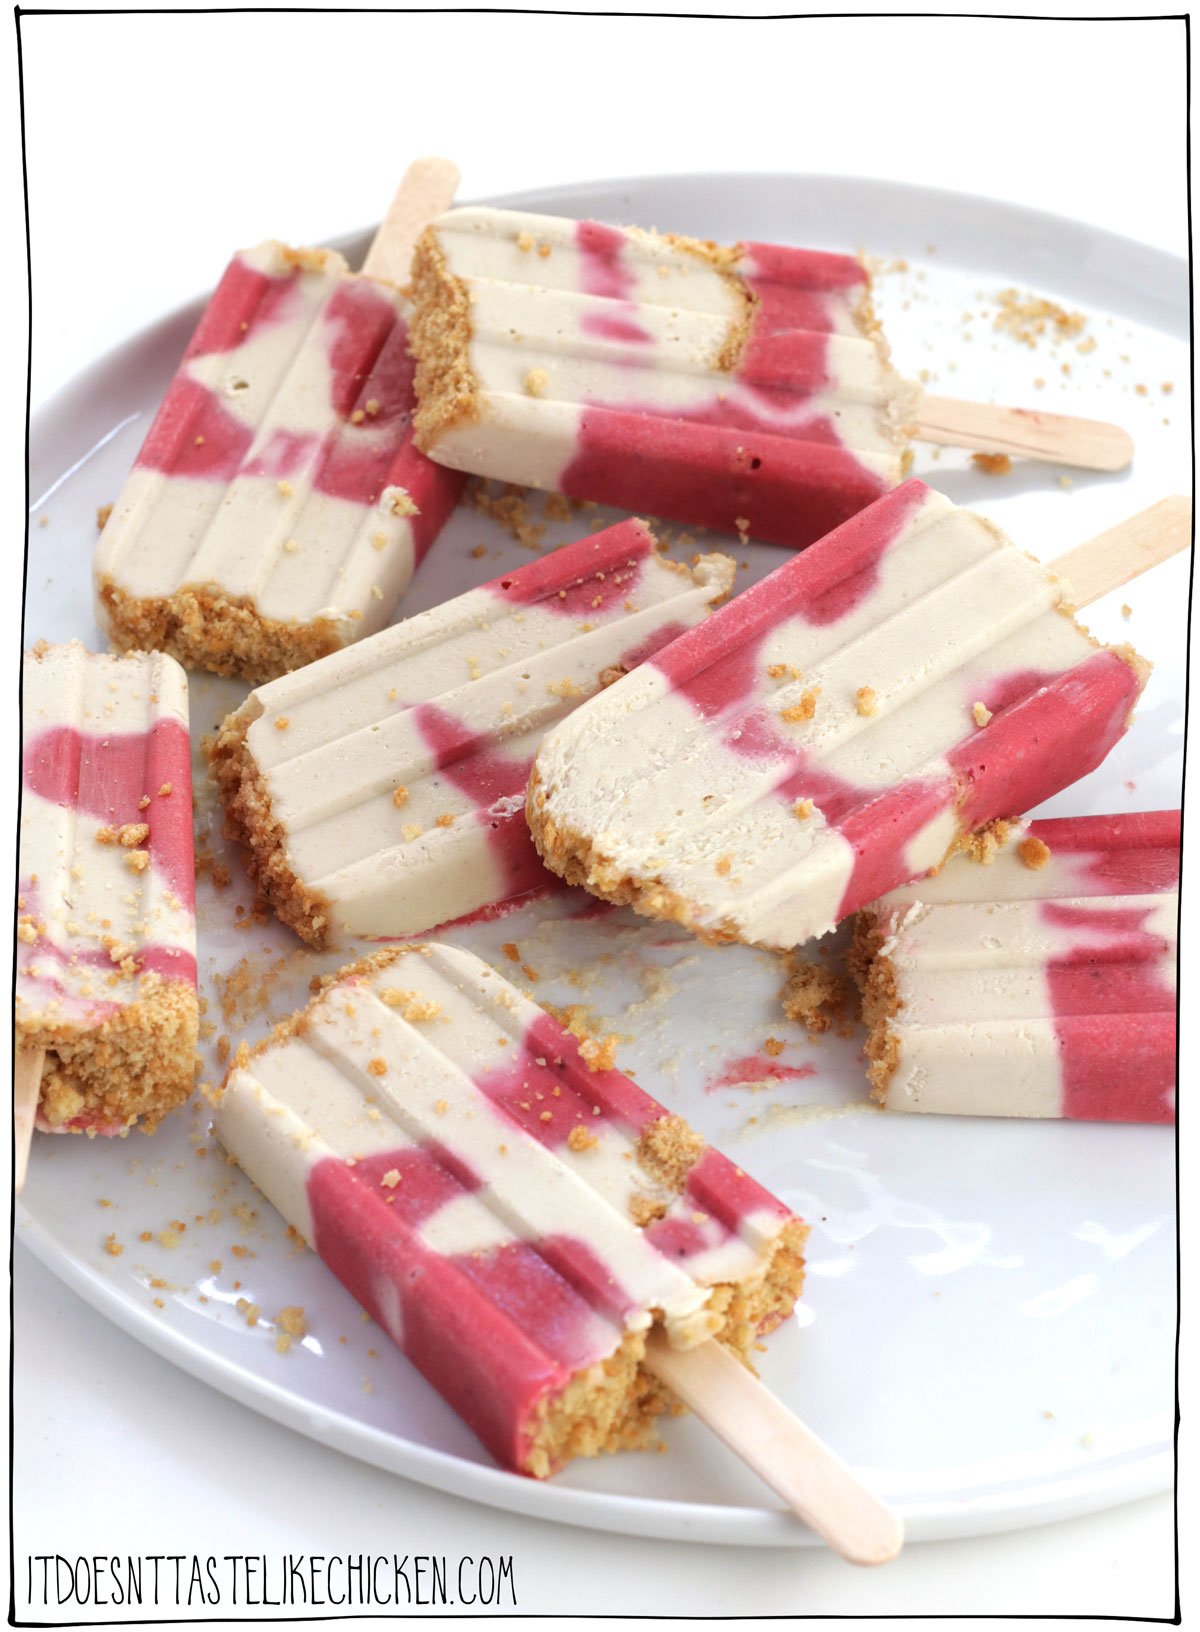 Vegan Strawberry Cheesecake Popsicles! These taste just like strawberry cheesecake- but on a stick! ... and frozen! I'm obsessed. It's a little shocking how just 8 ingredients and only 15 minutes of your time is all it takes to whip up the delicious treats. Just blend, pour, and freeze. #itdoesnttastelikechicken #veganrecipes #dairyfree